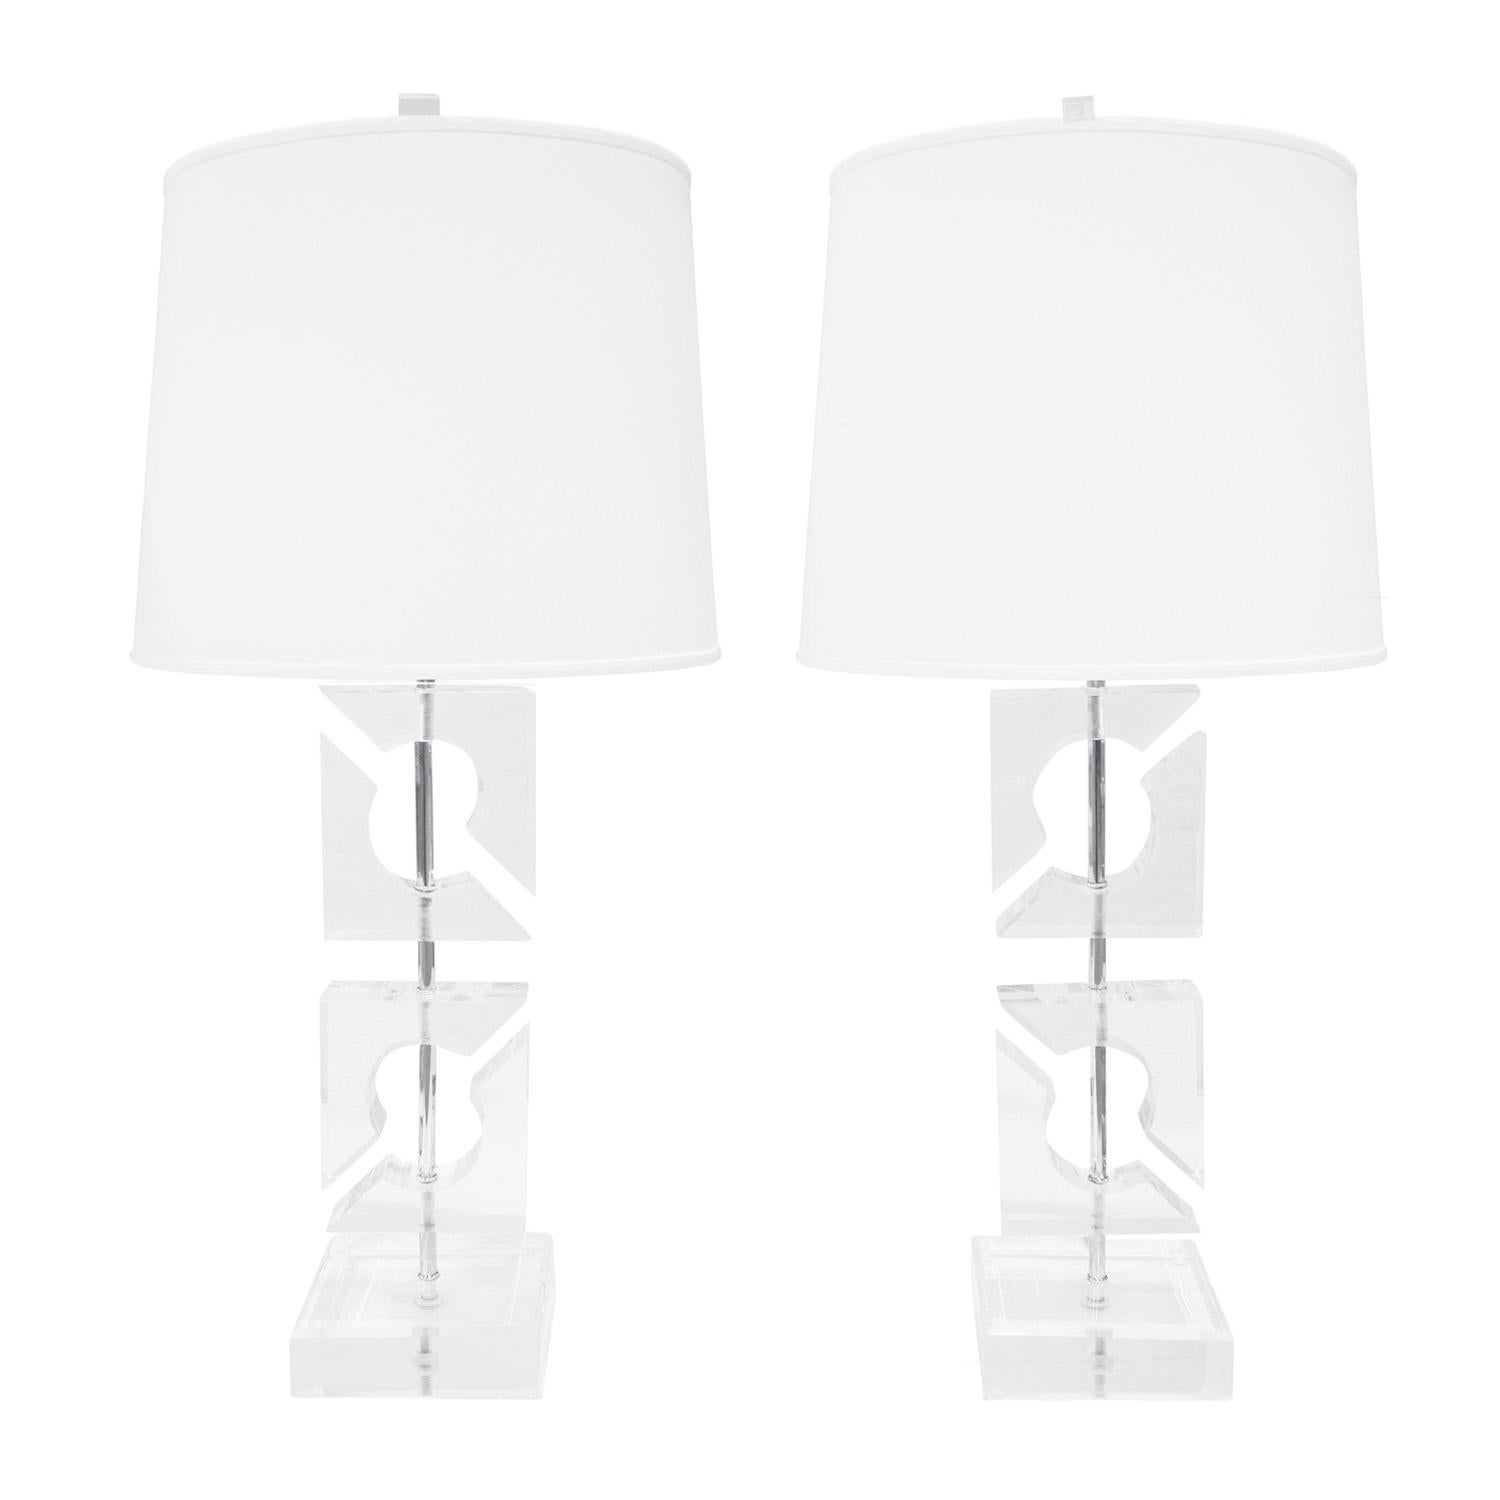 Pair of artisan made sculptural table lamps, solid lucite graphic forms mounted with chrome hardware, American 1970's. These lamps are very chic. The lucite is crisp and clear.

Dimensions for each:

W: 7 inches
D: 7 inches
H: 36 inches
Shade